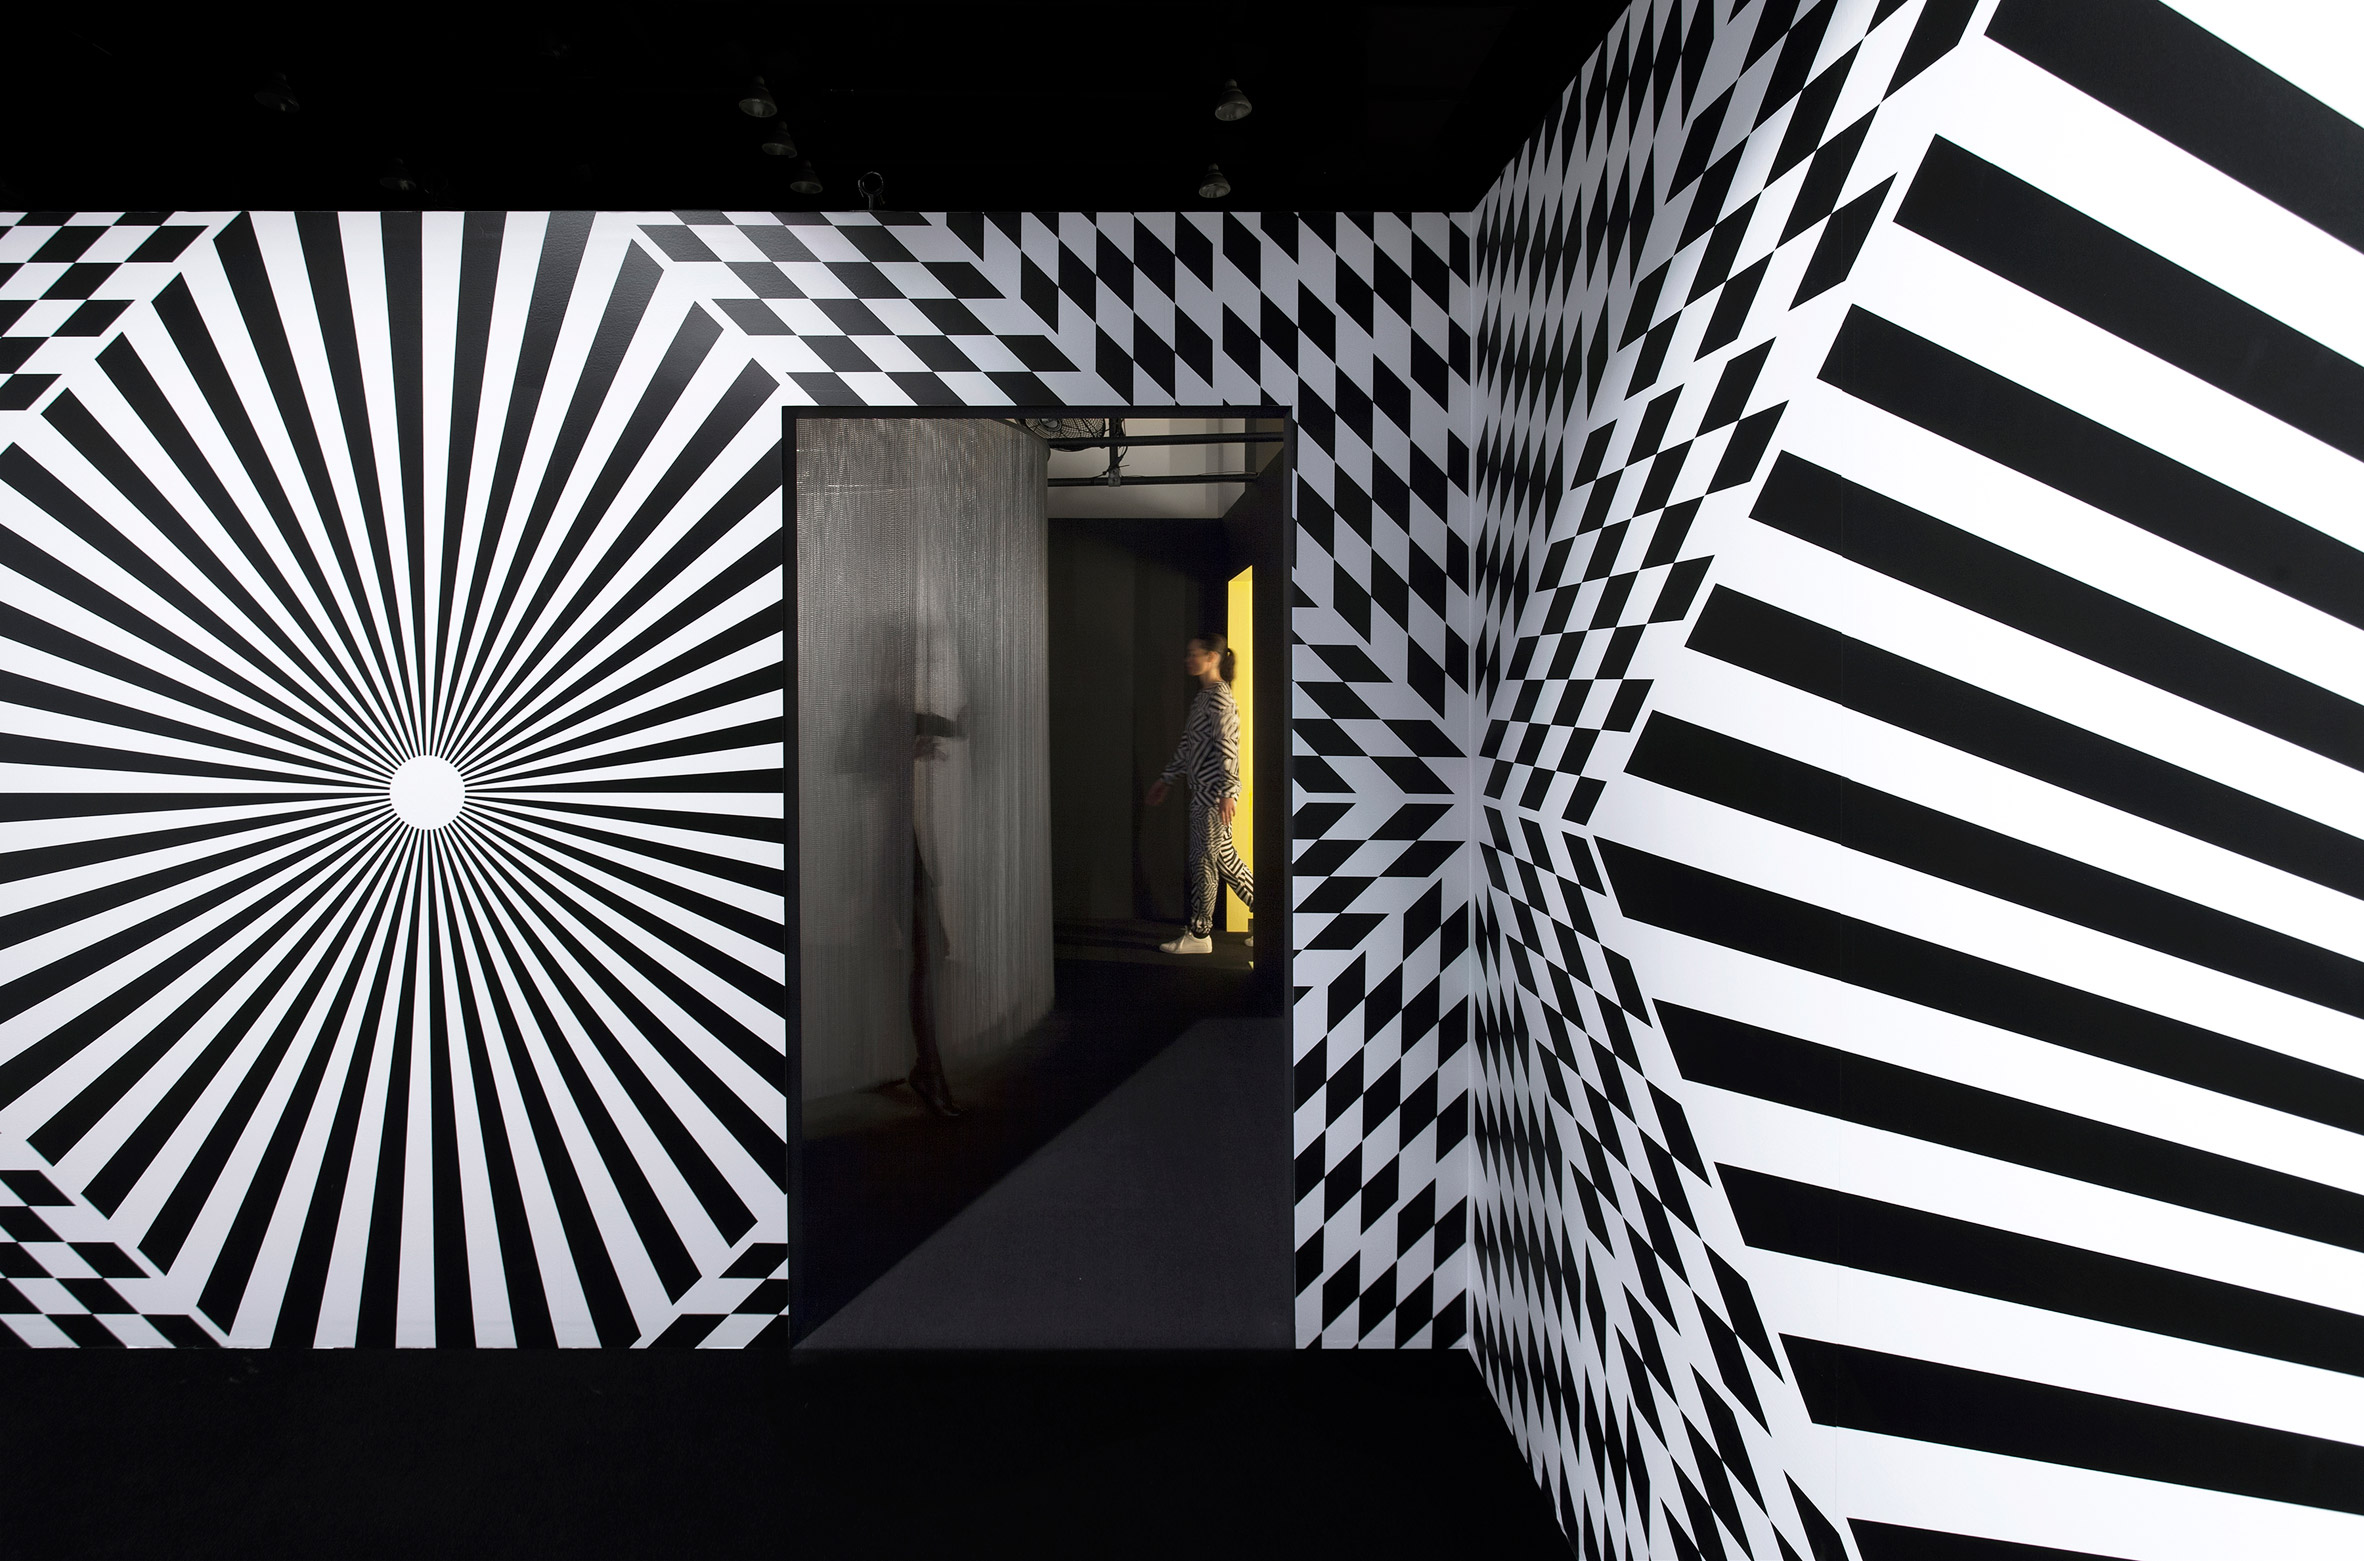 Bold patterns, mirrors and secret doors trick visitors to maze installation in New York